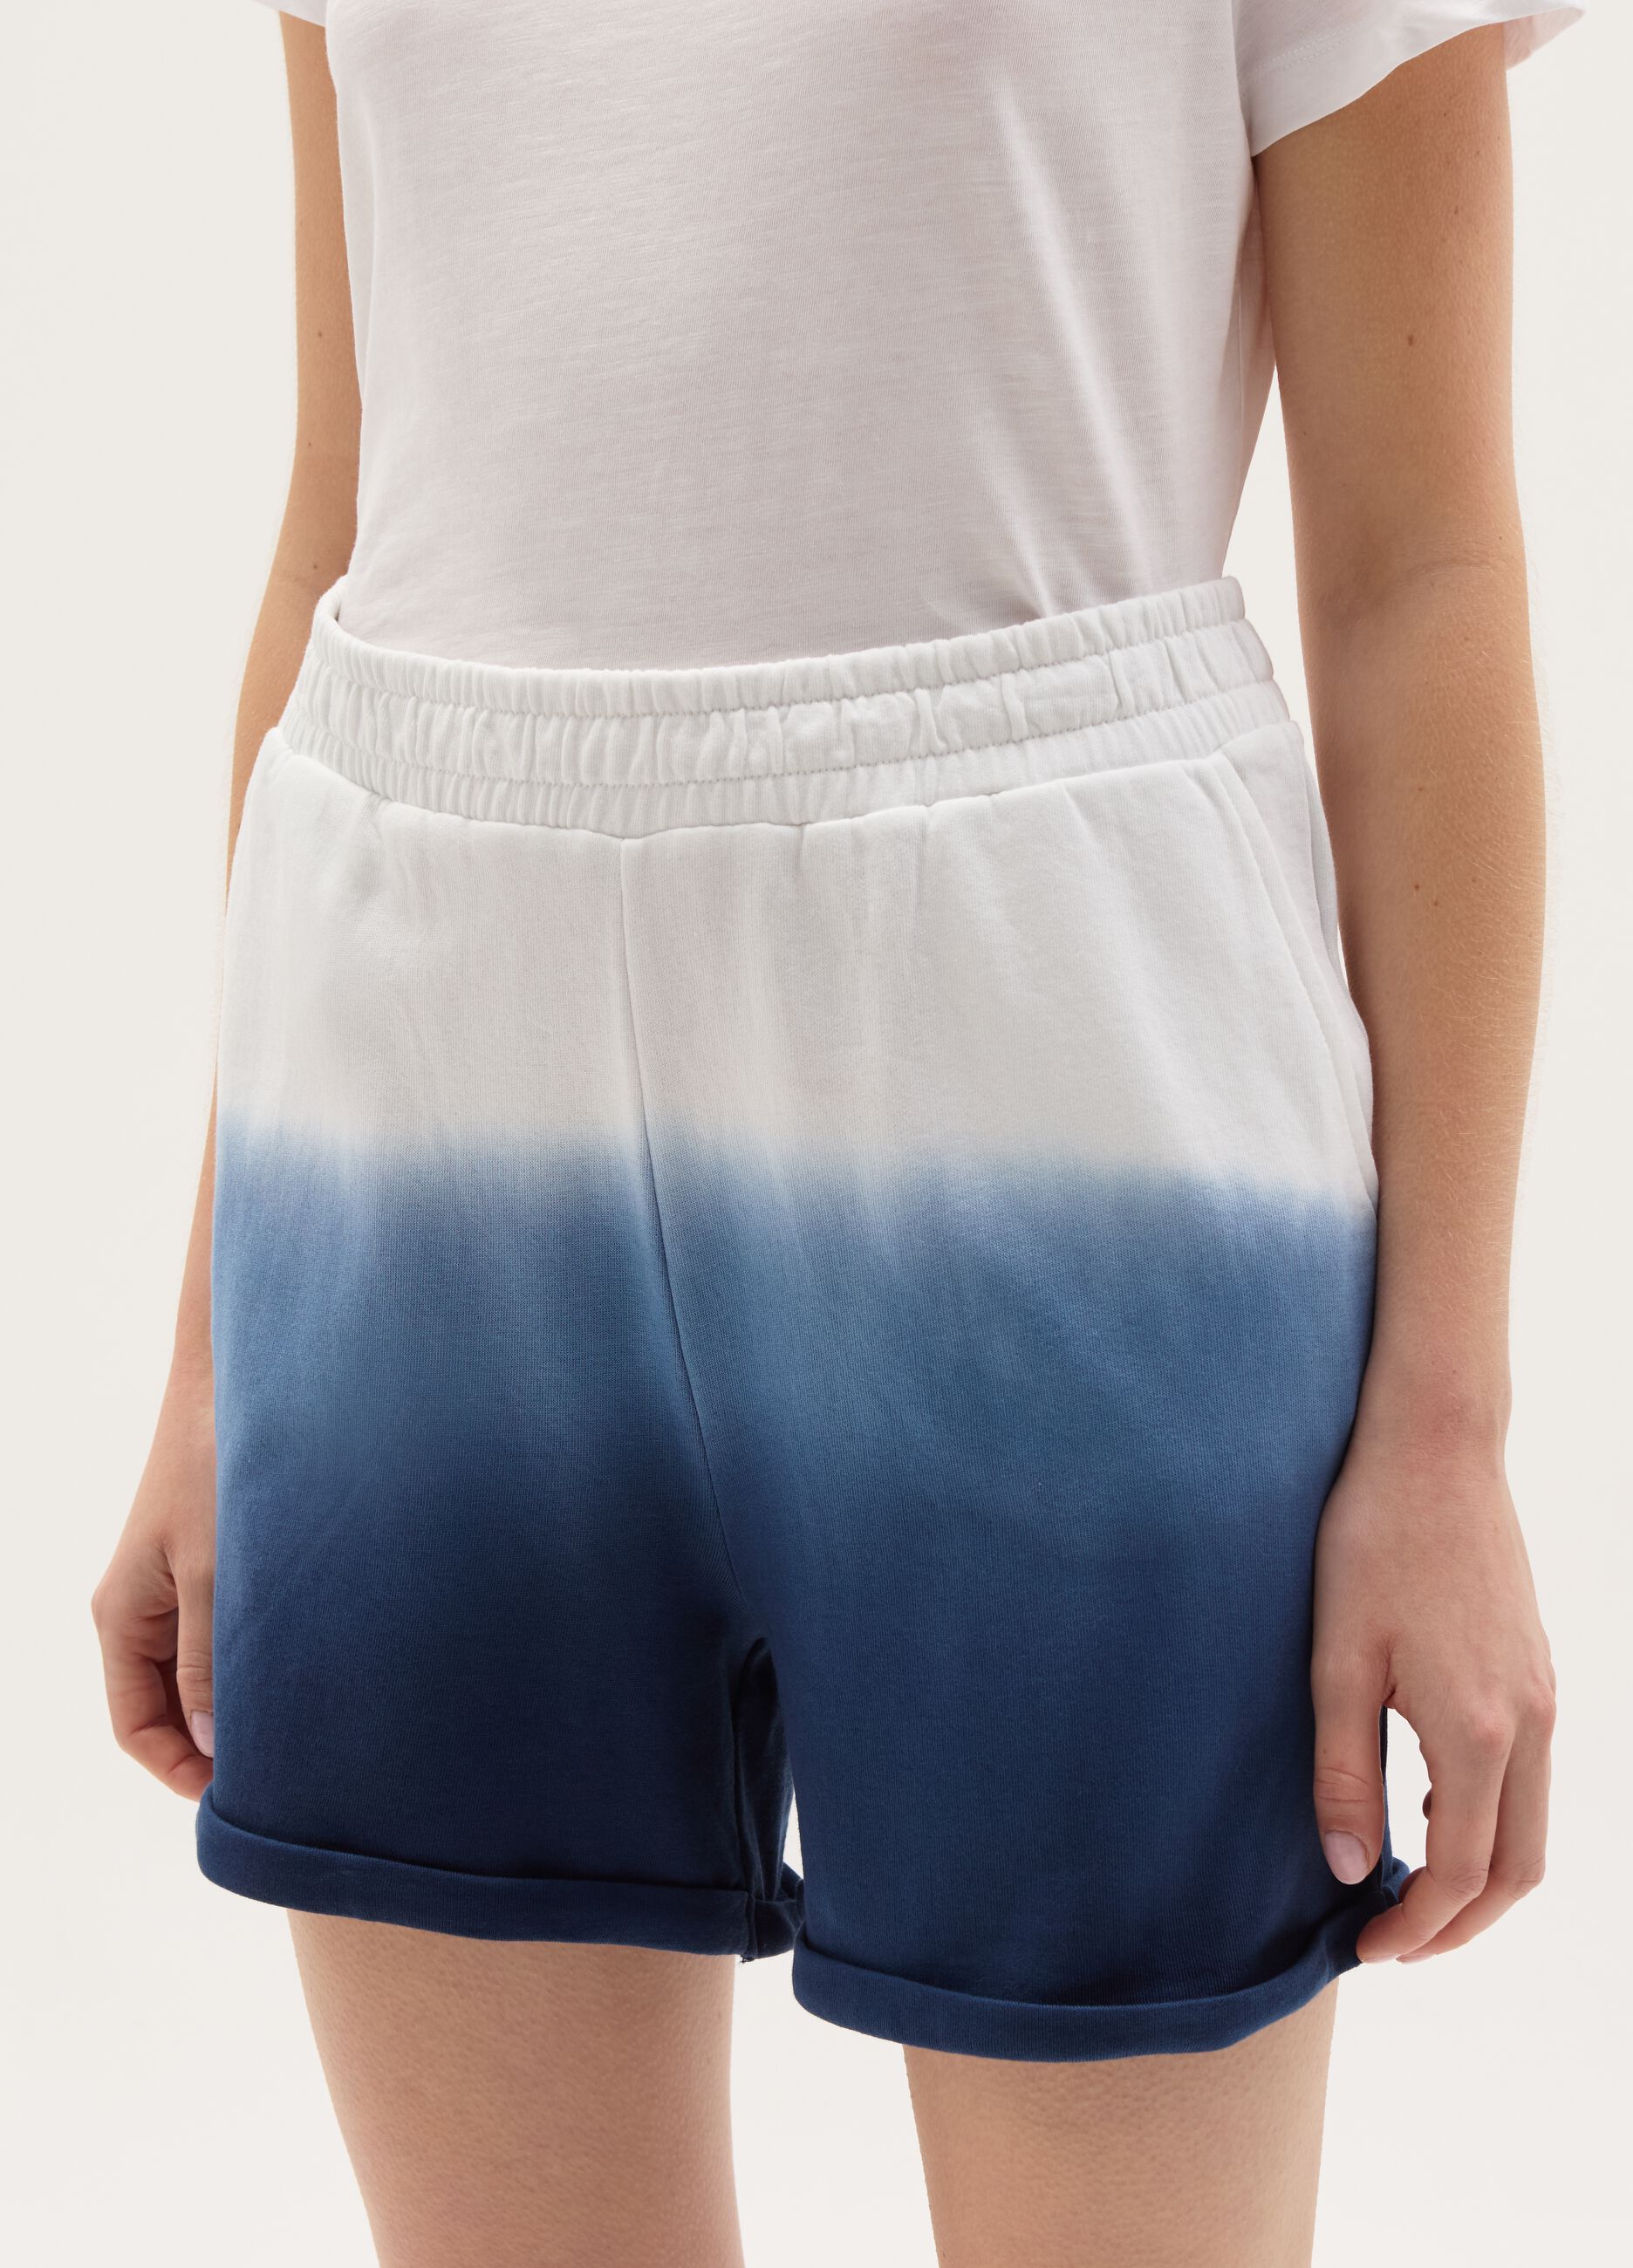 Essential degradé shorts with turn-ups